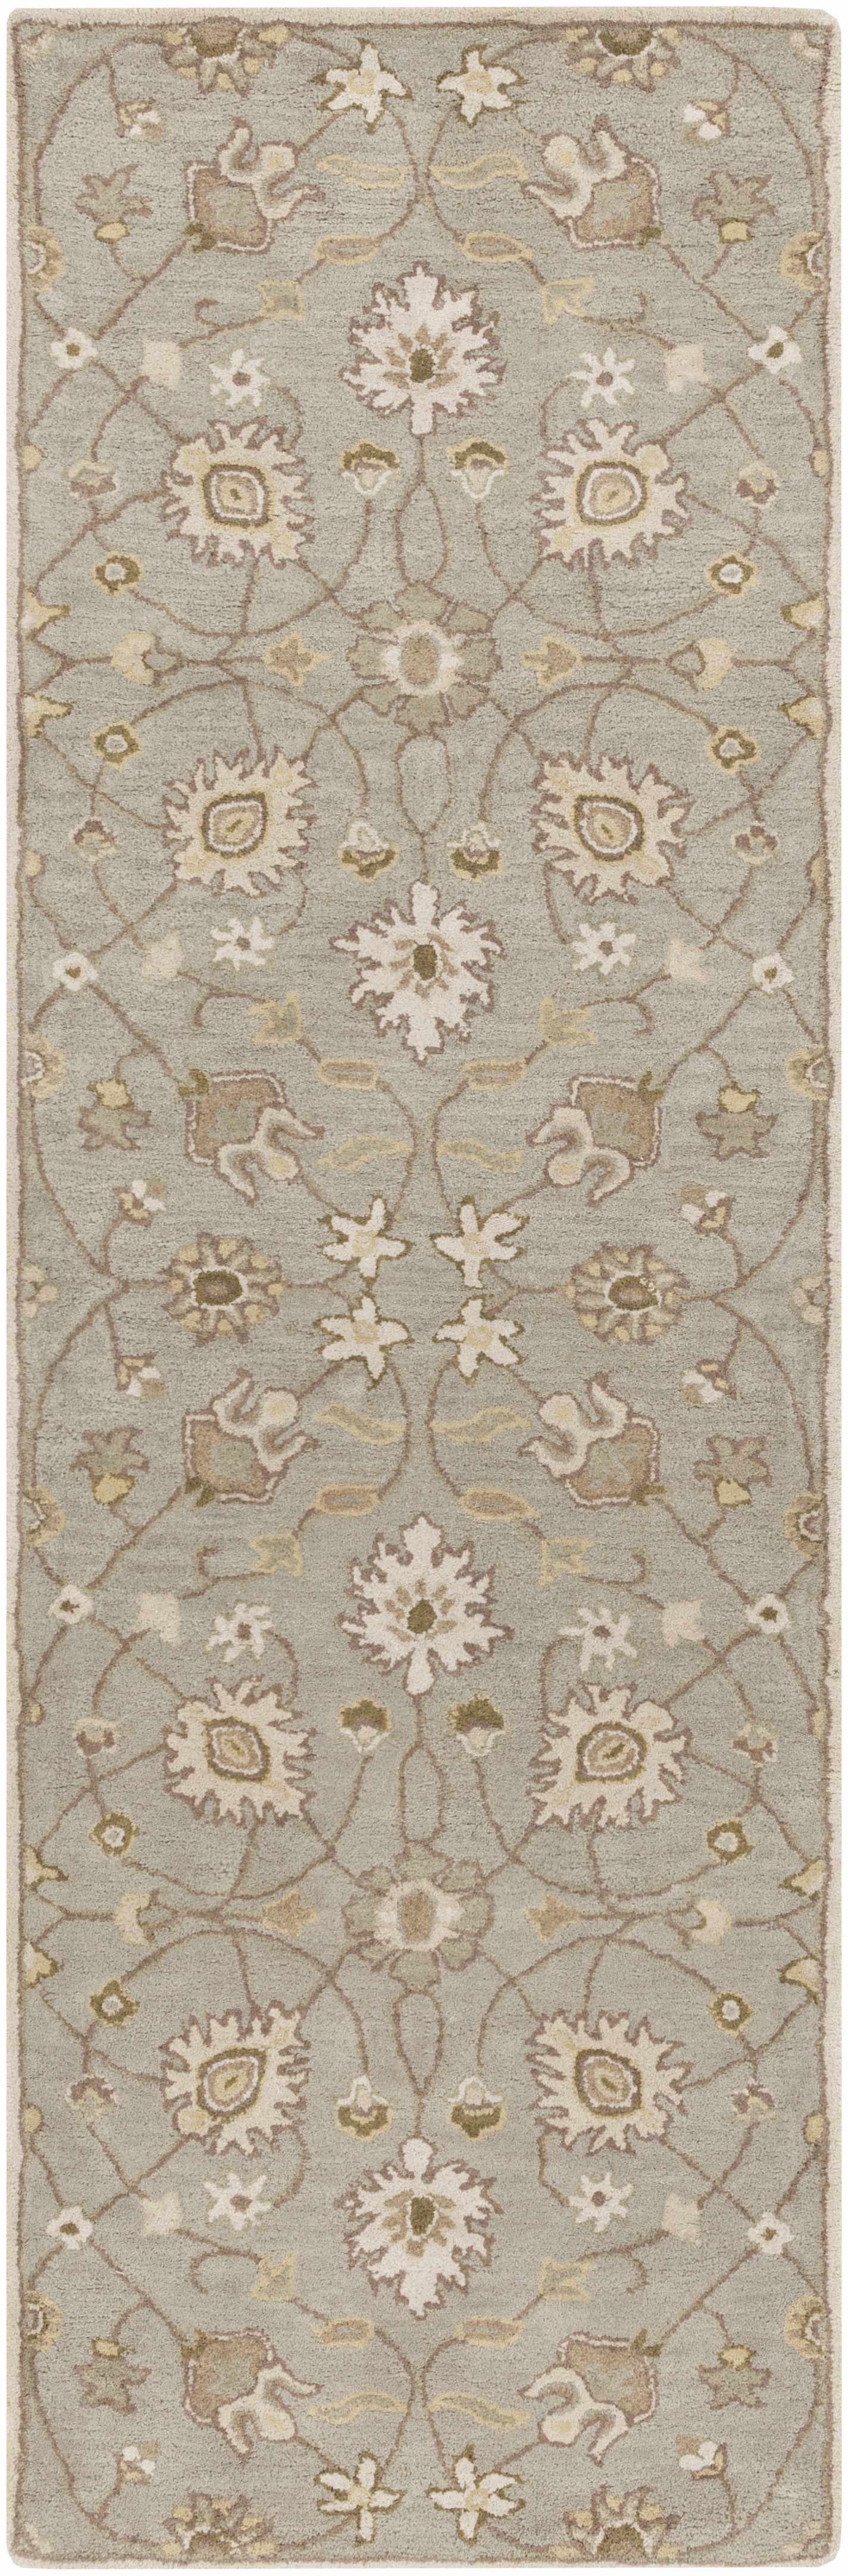 Boutique Rugs Rugs Logville Hand Tufted Light Olive 1121 Area Rug